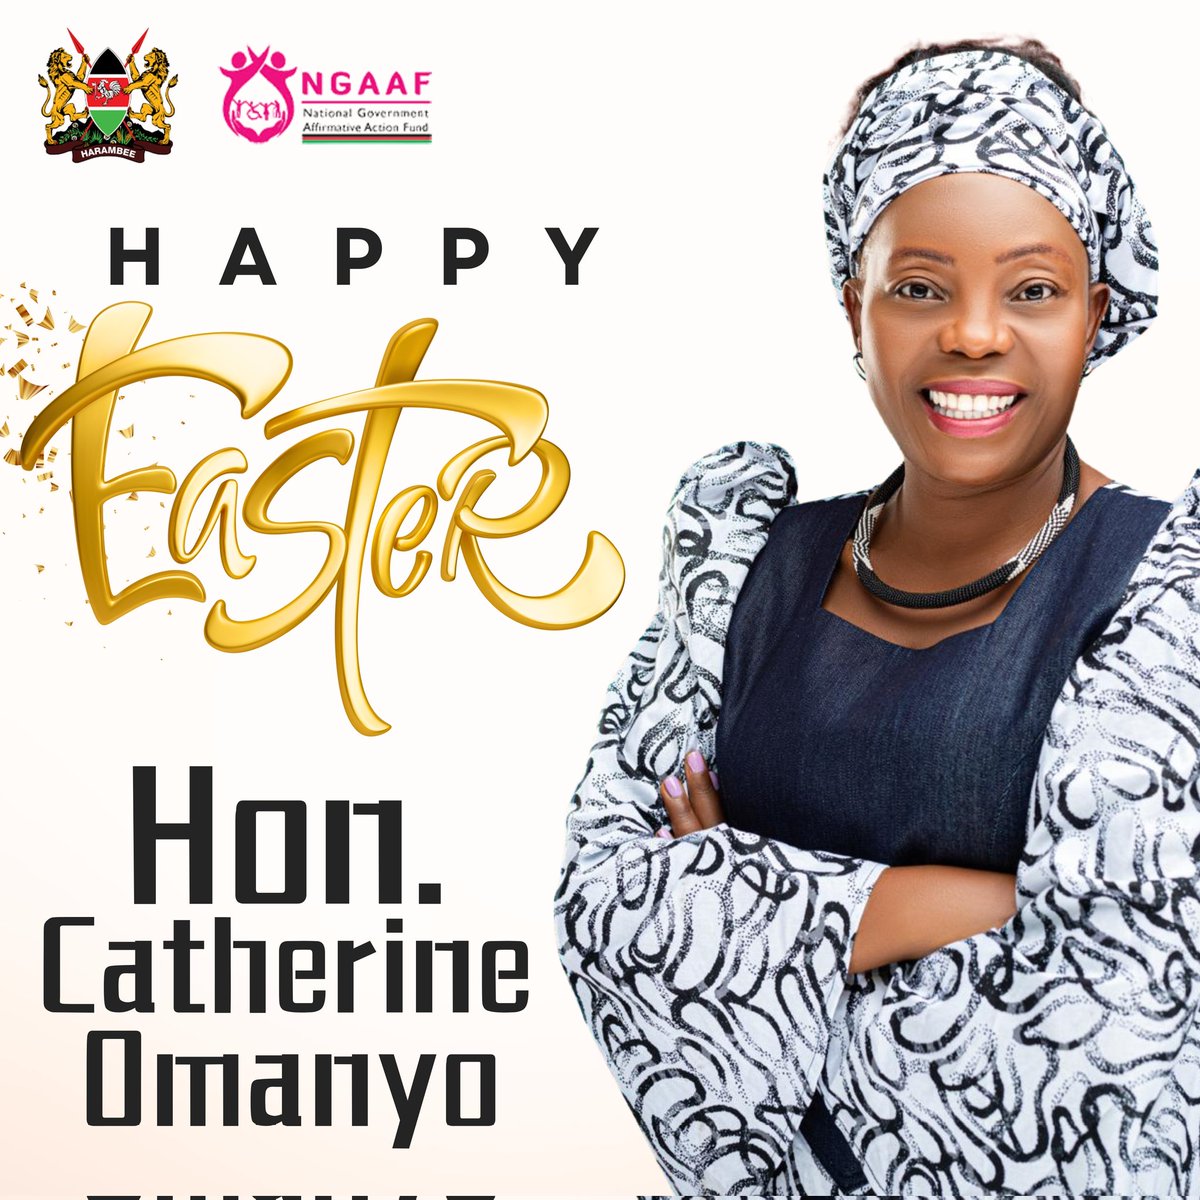 Happy Easter to you and your loved ones. Have a blessed Easter.